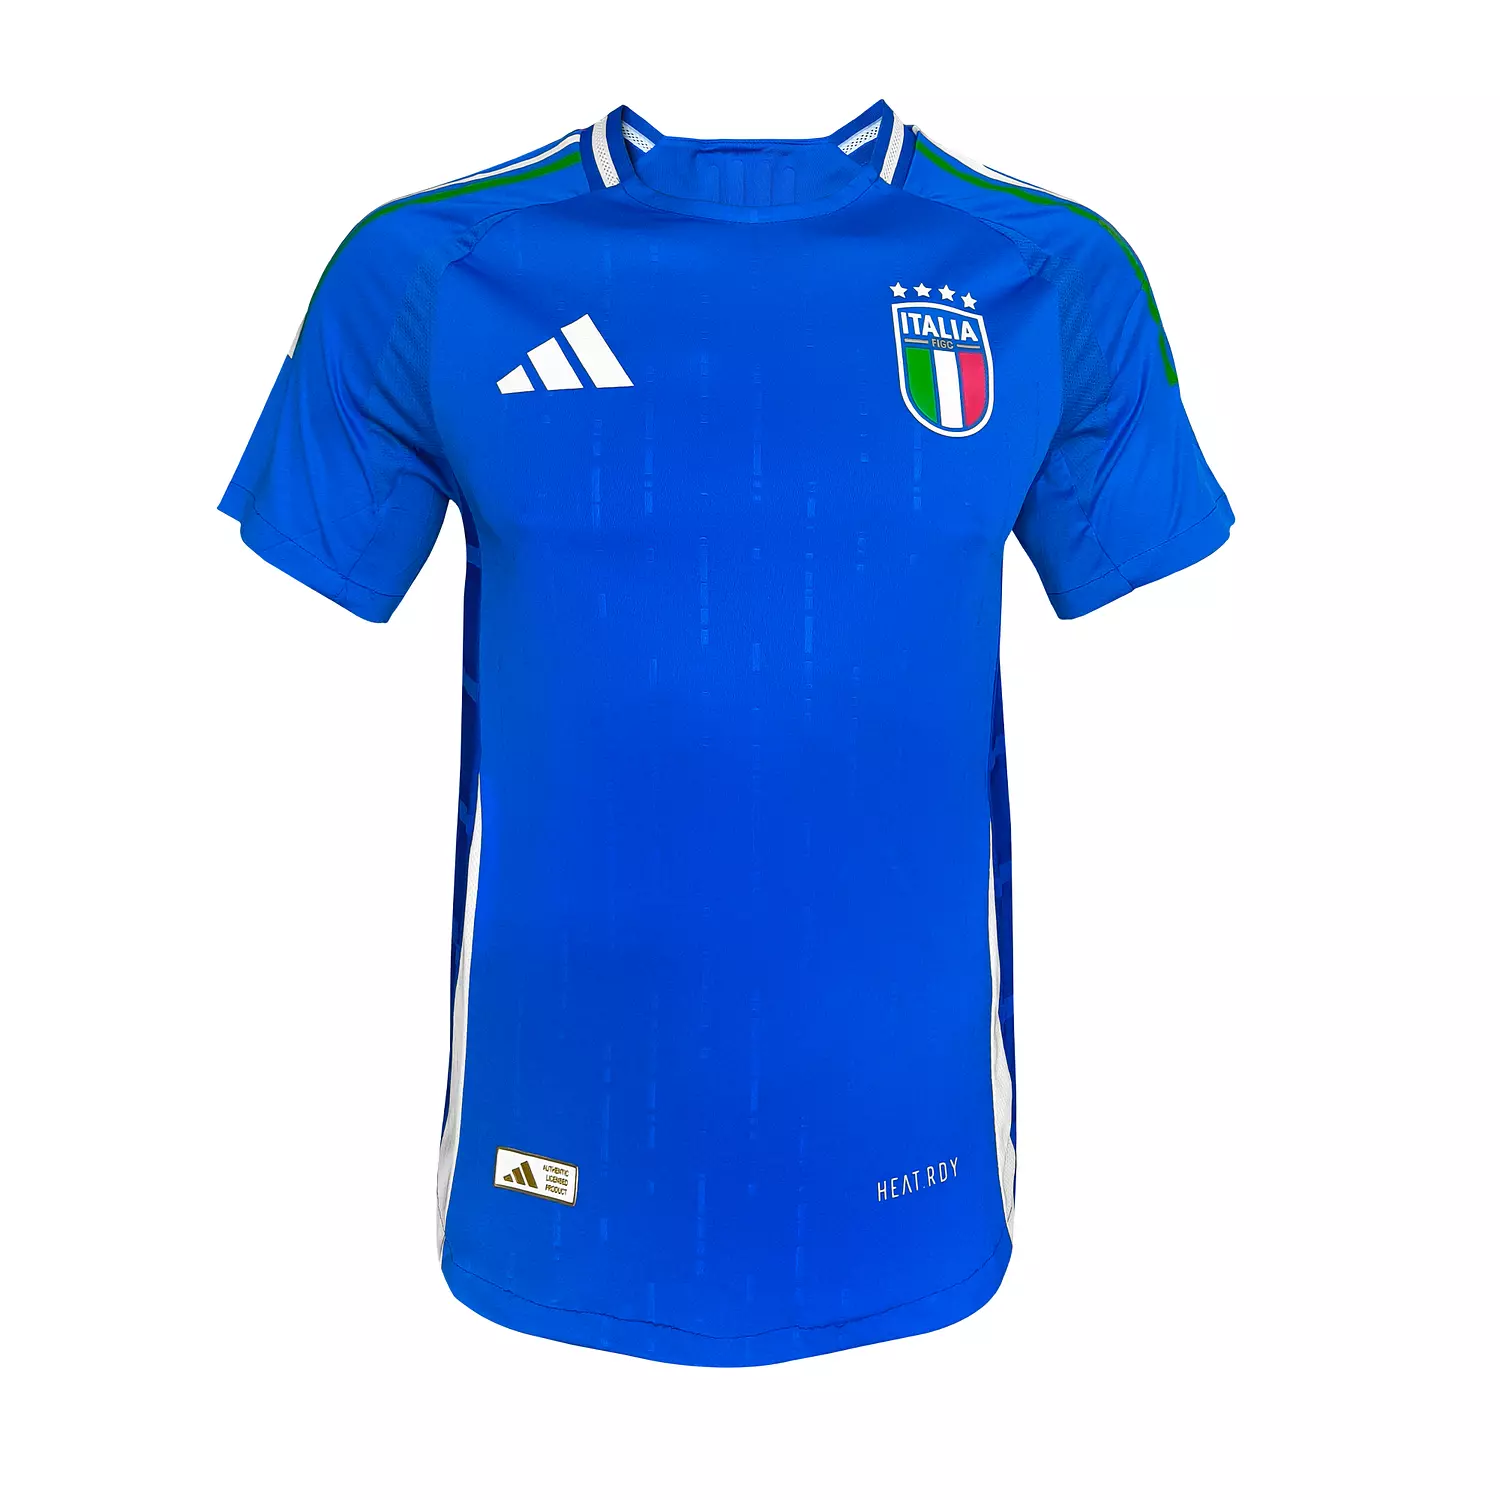 ITALY EURO 24 - PLAYER hover image